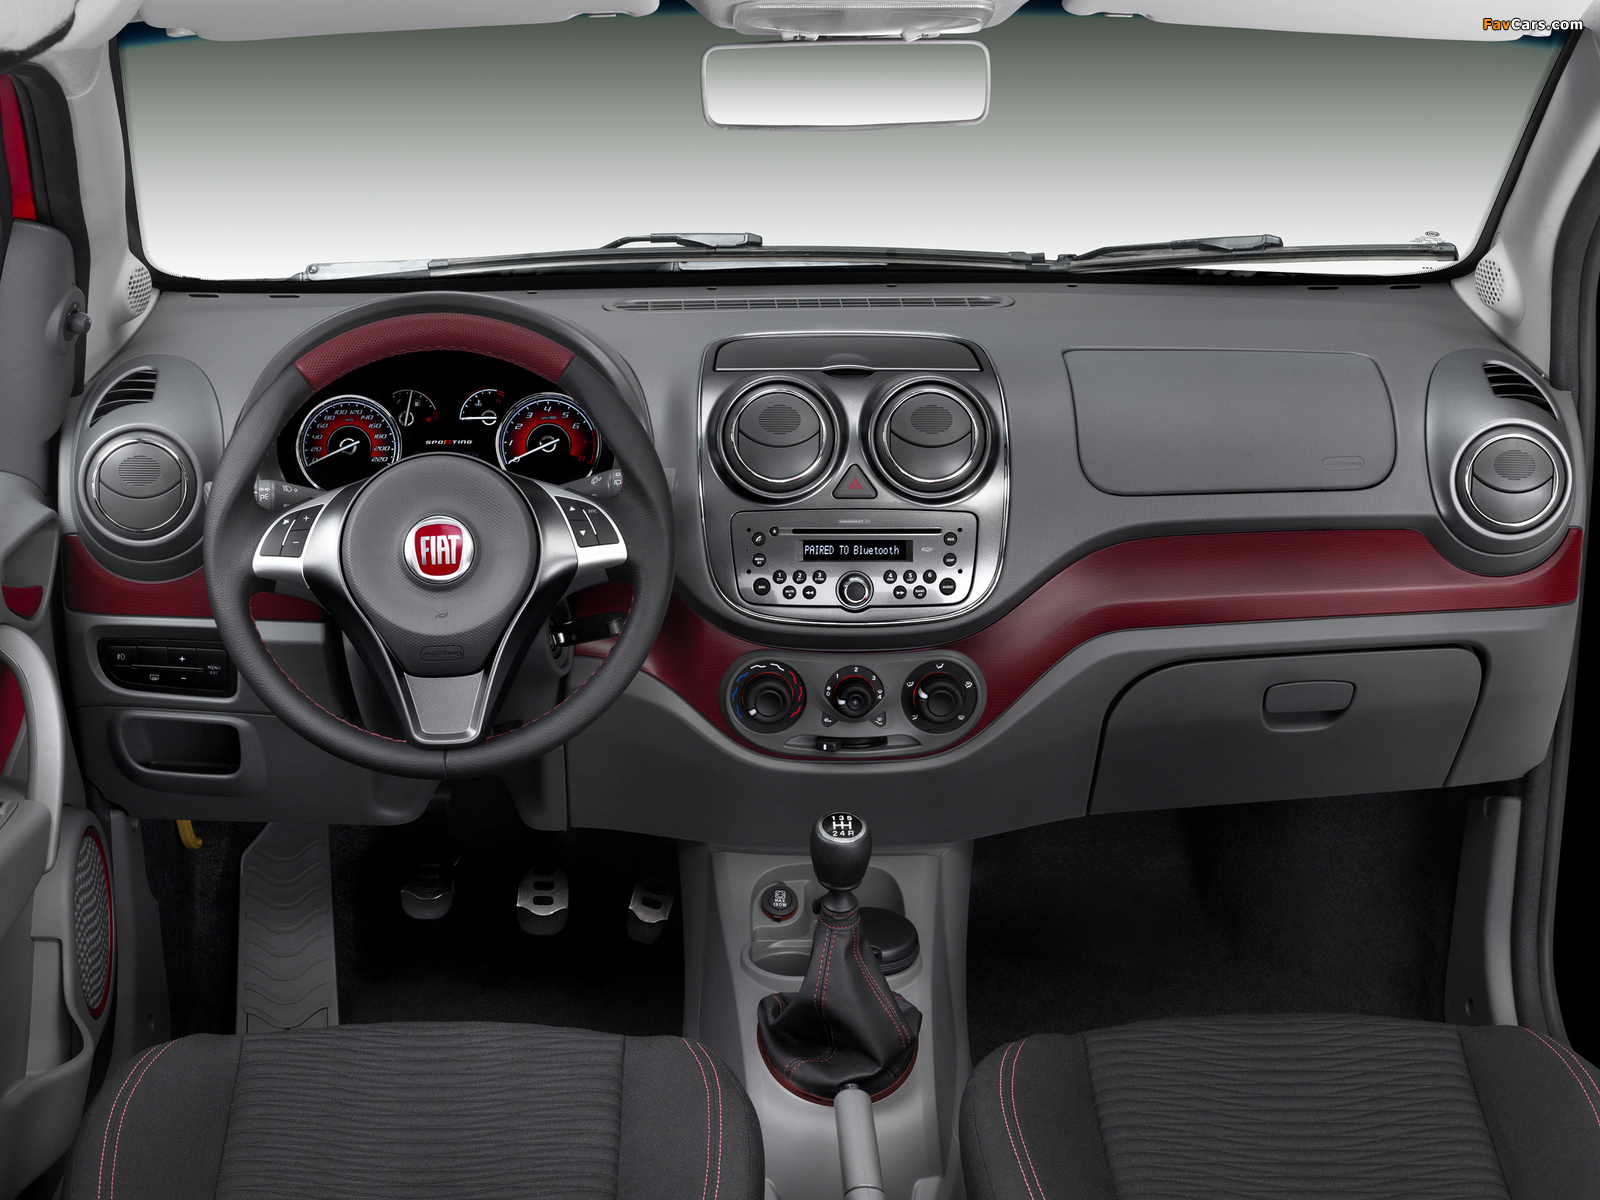 Fiat Palio Sporting (326) 2011 images (1600 x 1200)